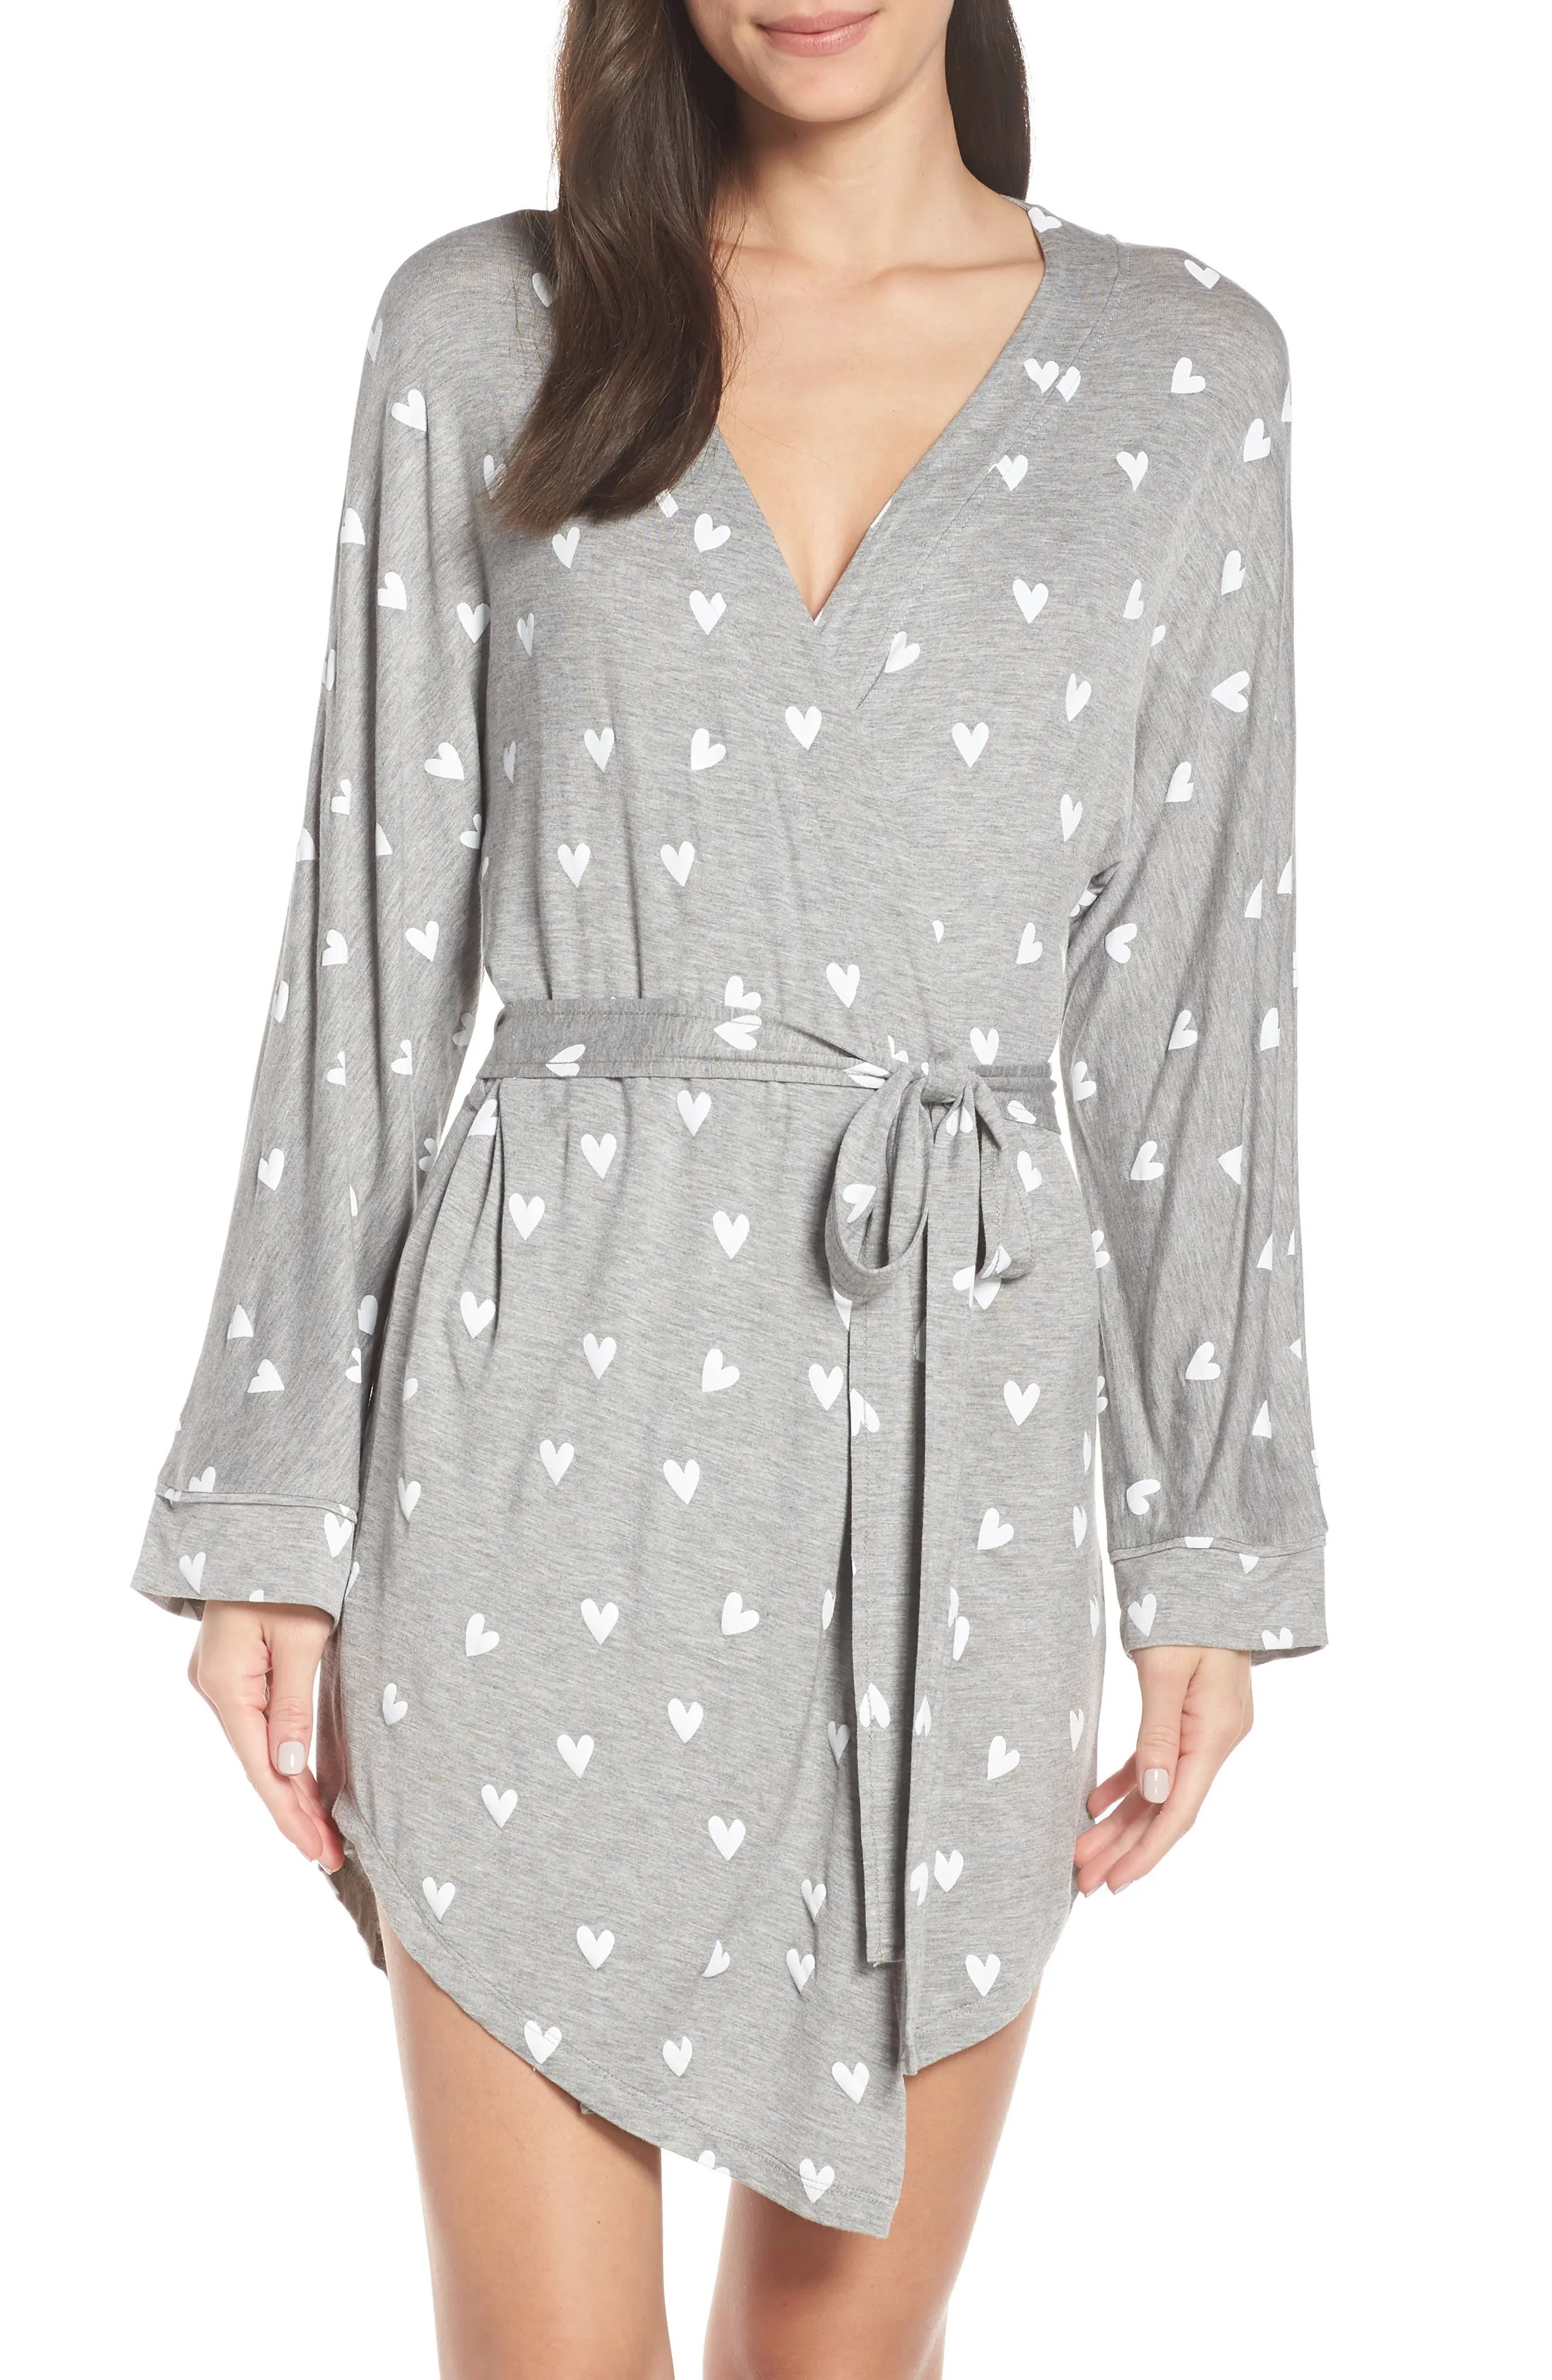 Honeydew Intimates All American Jersey Robe (2 for $60) | Nordstrom